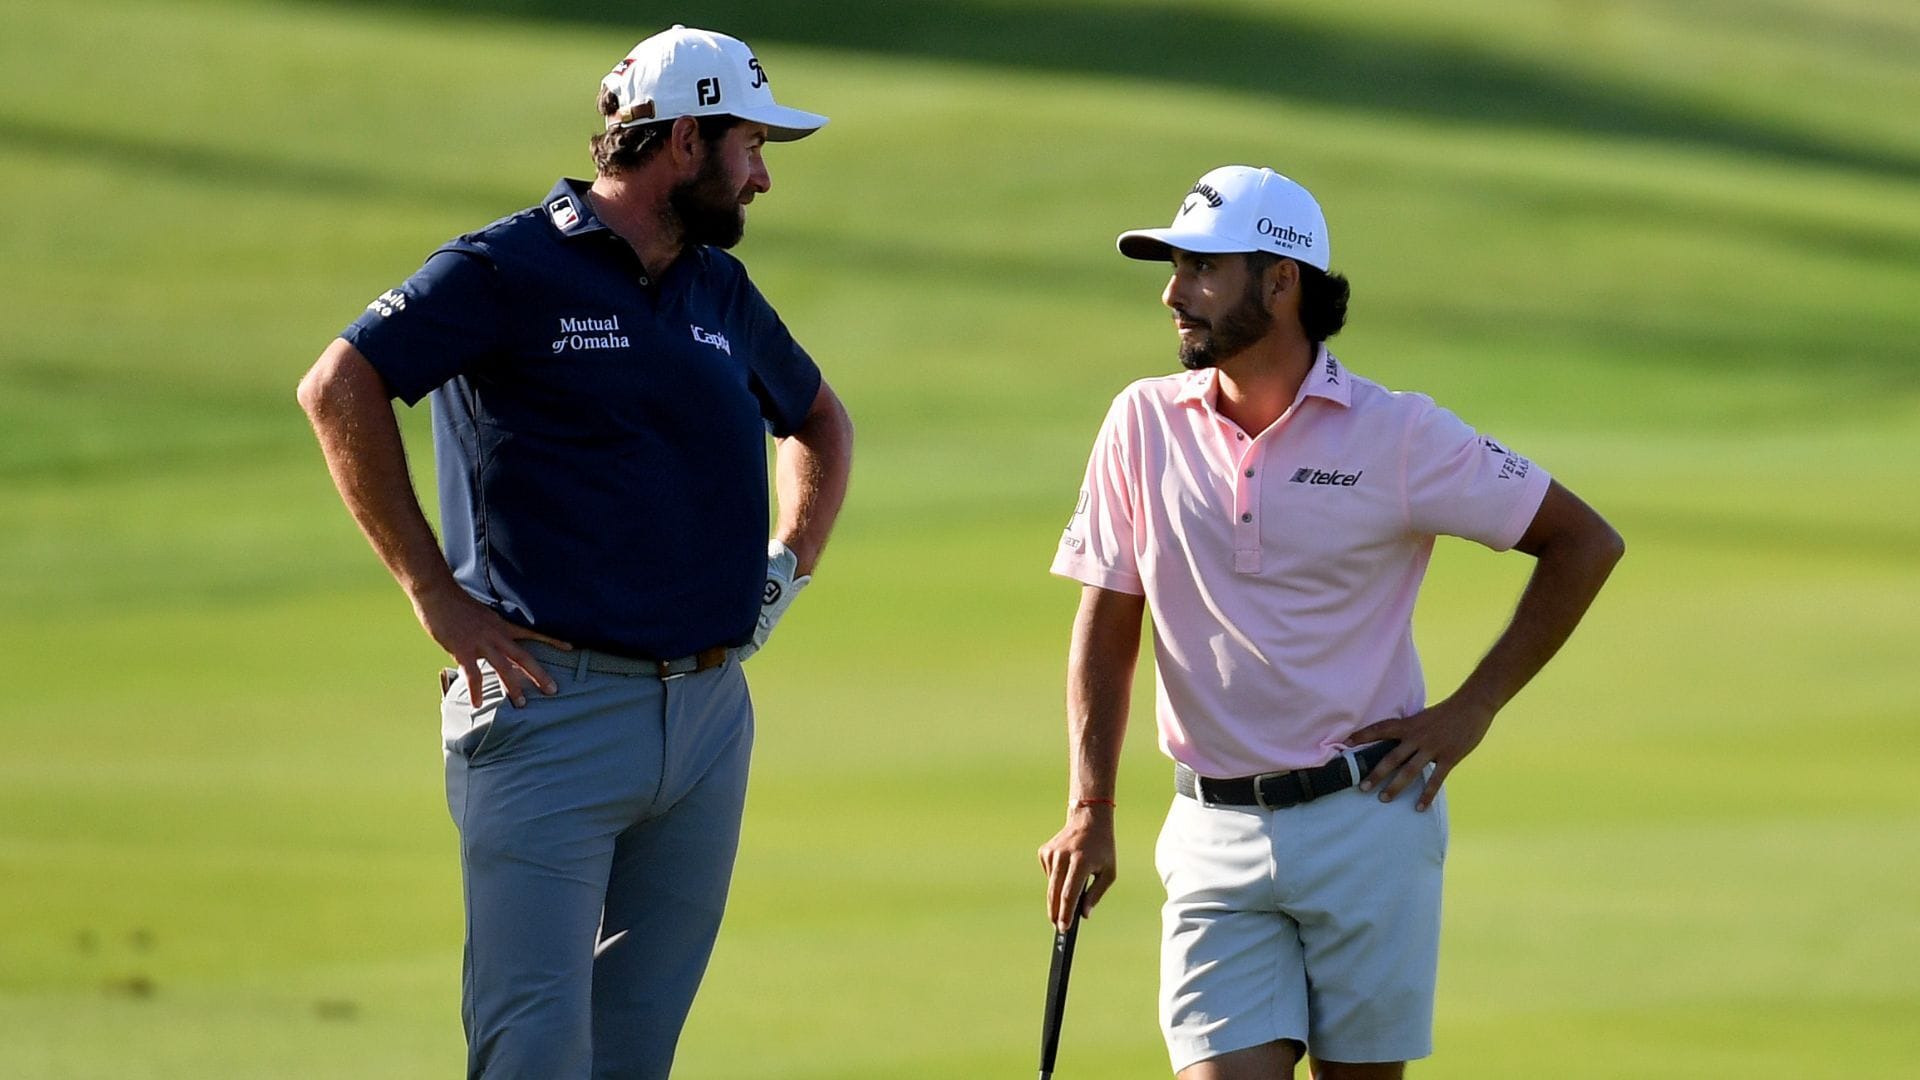 Abraham Ancer, Cameron Young break away from pack at Saudi International